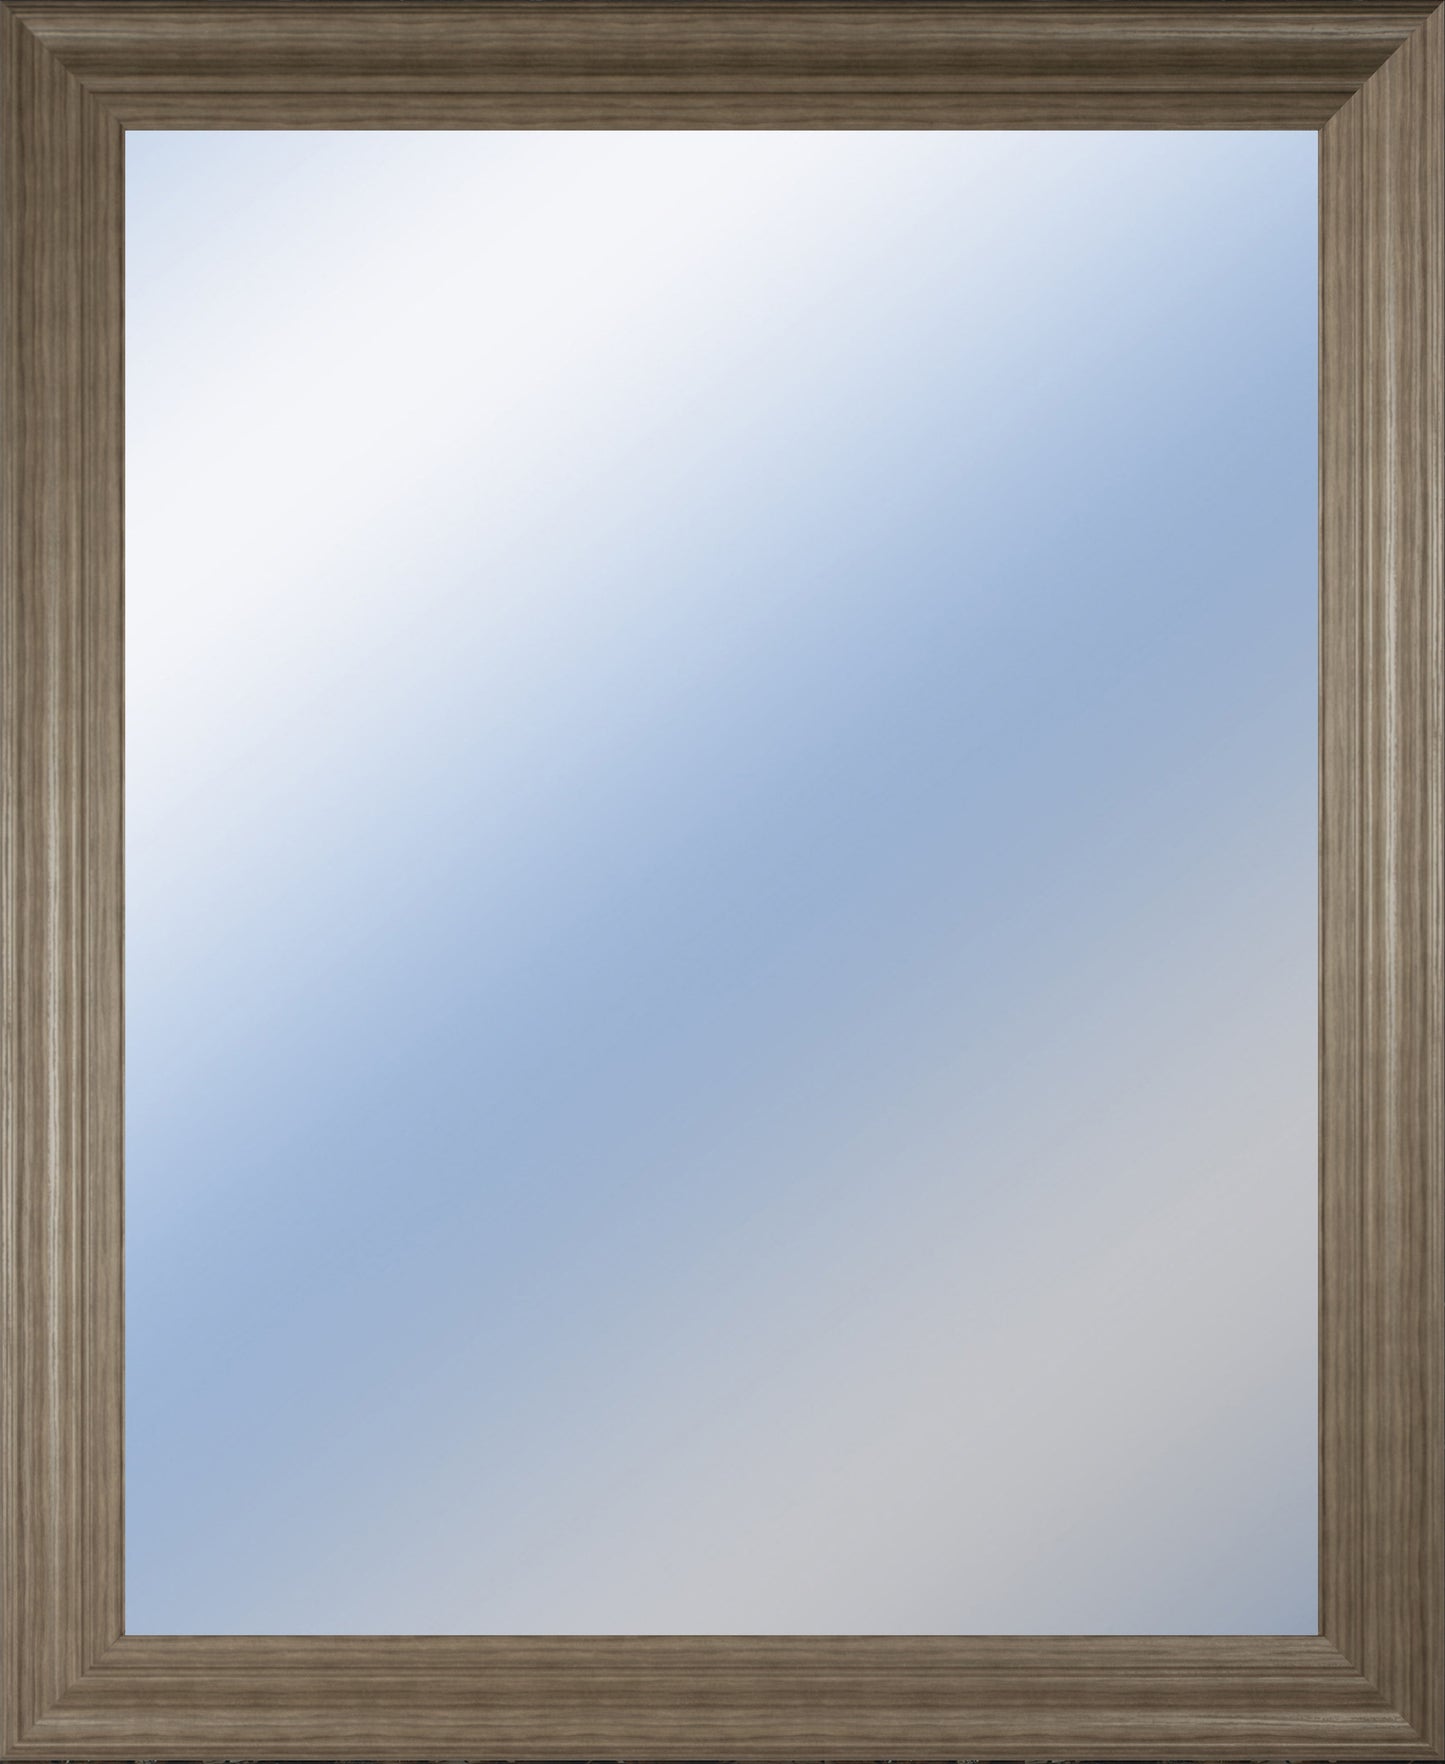 Decorative Framed Wall Mirror By Classy Art 34x40 Promotional Mirror Frame #44